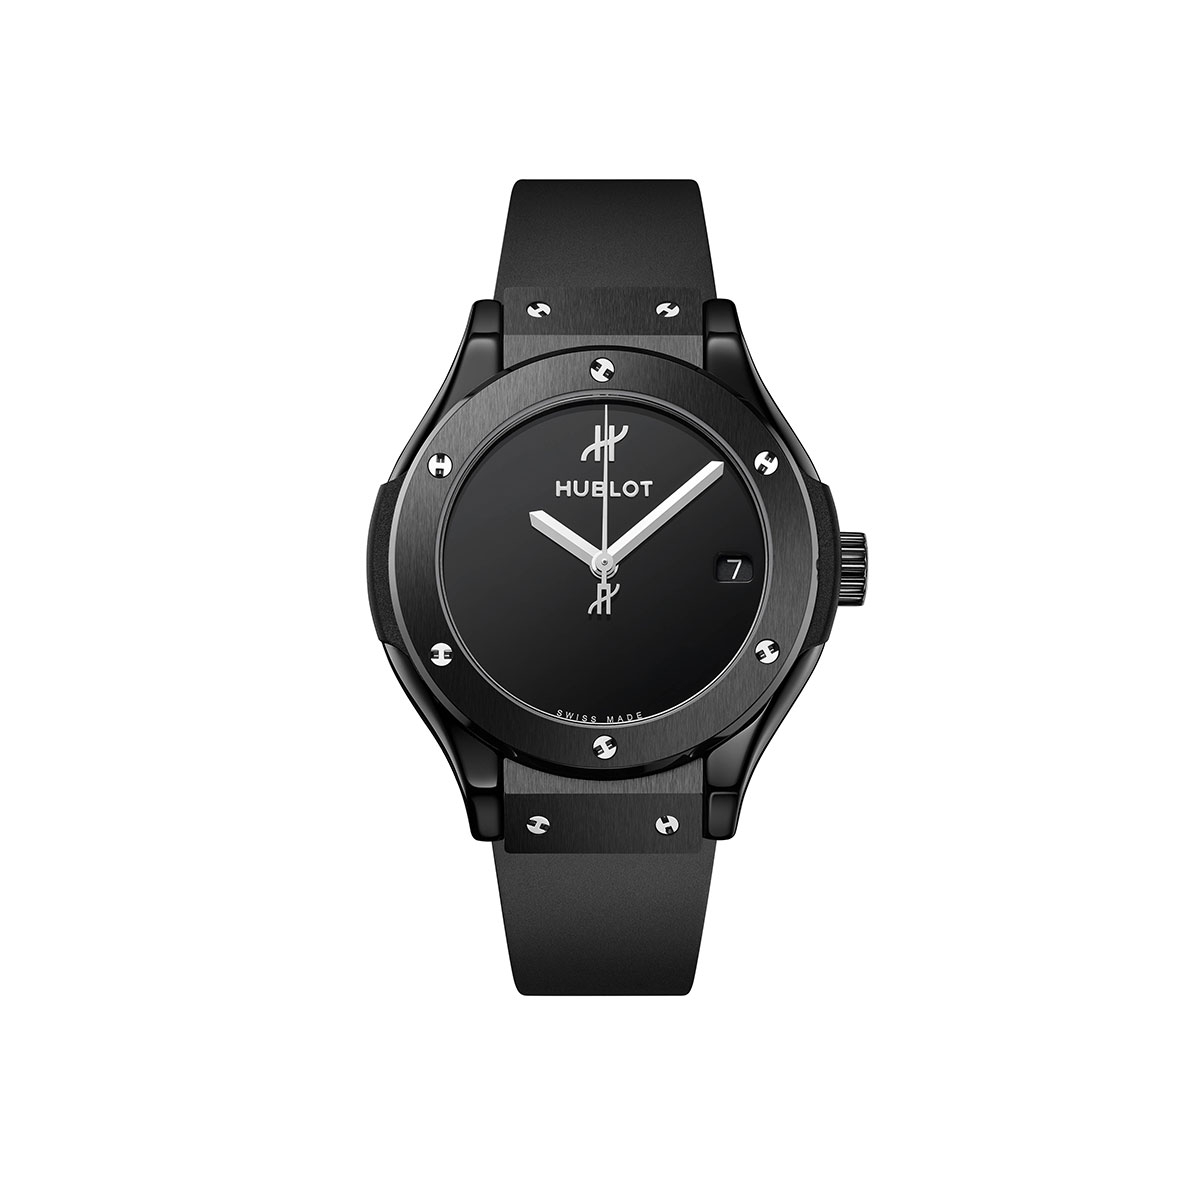 Hublot Classic Fusion 3-Hands watches